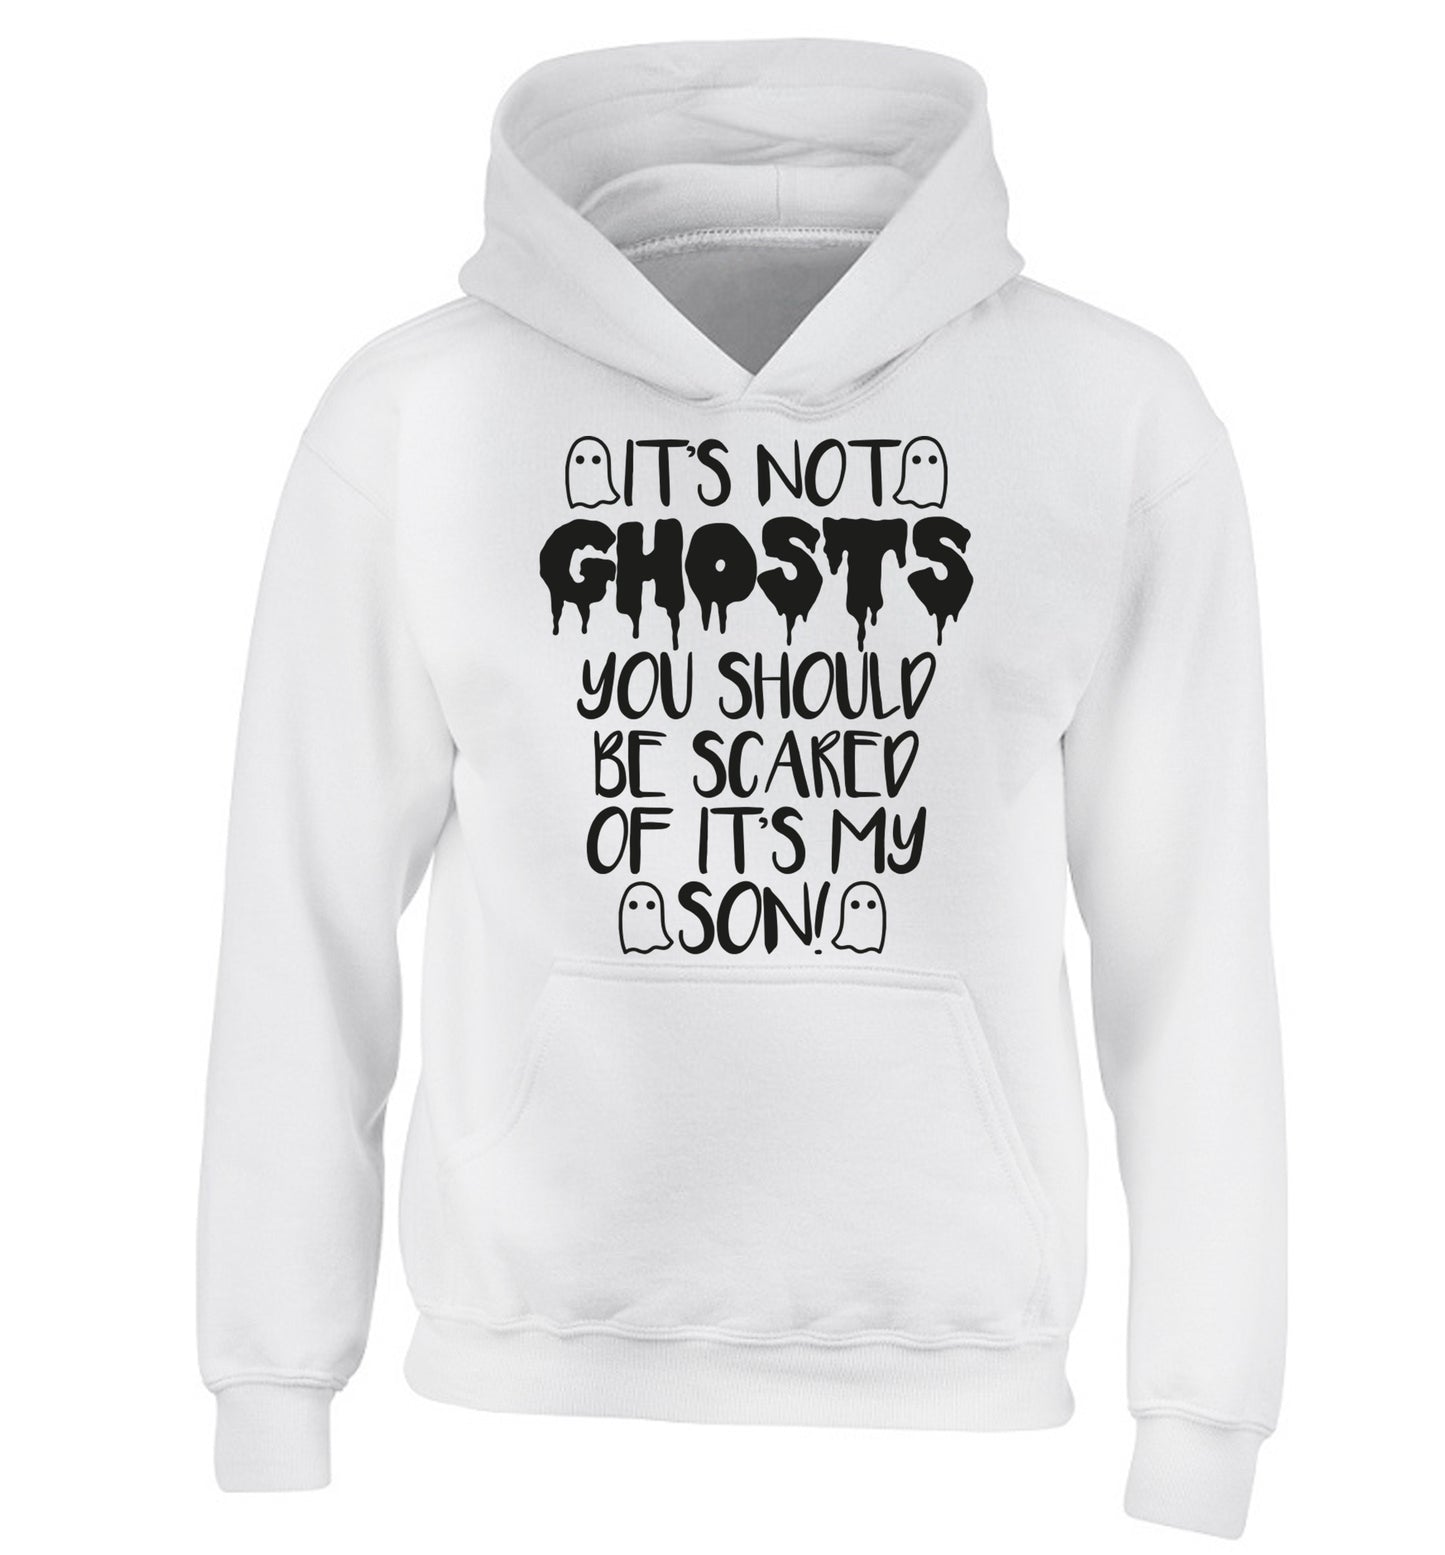 It's not ghosts you should be scared of it's my son! children's white hoodie 12-14 Years